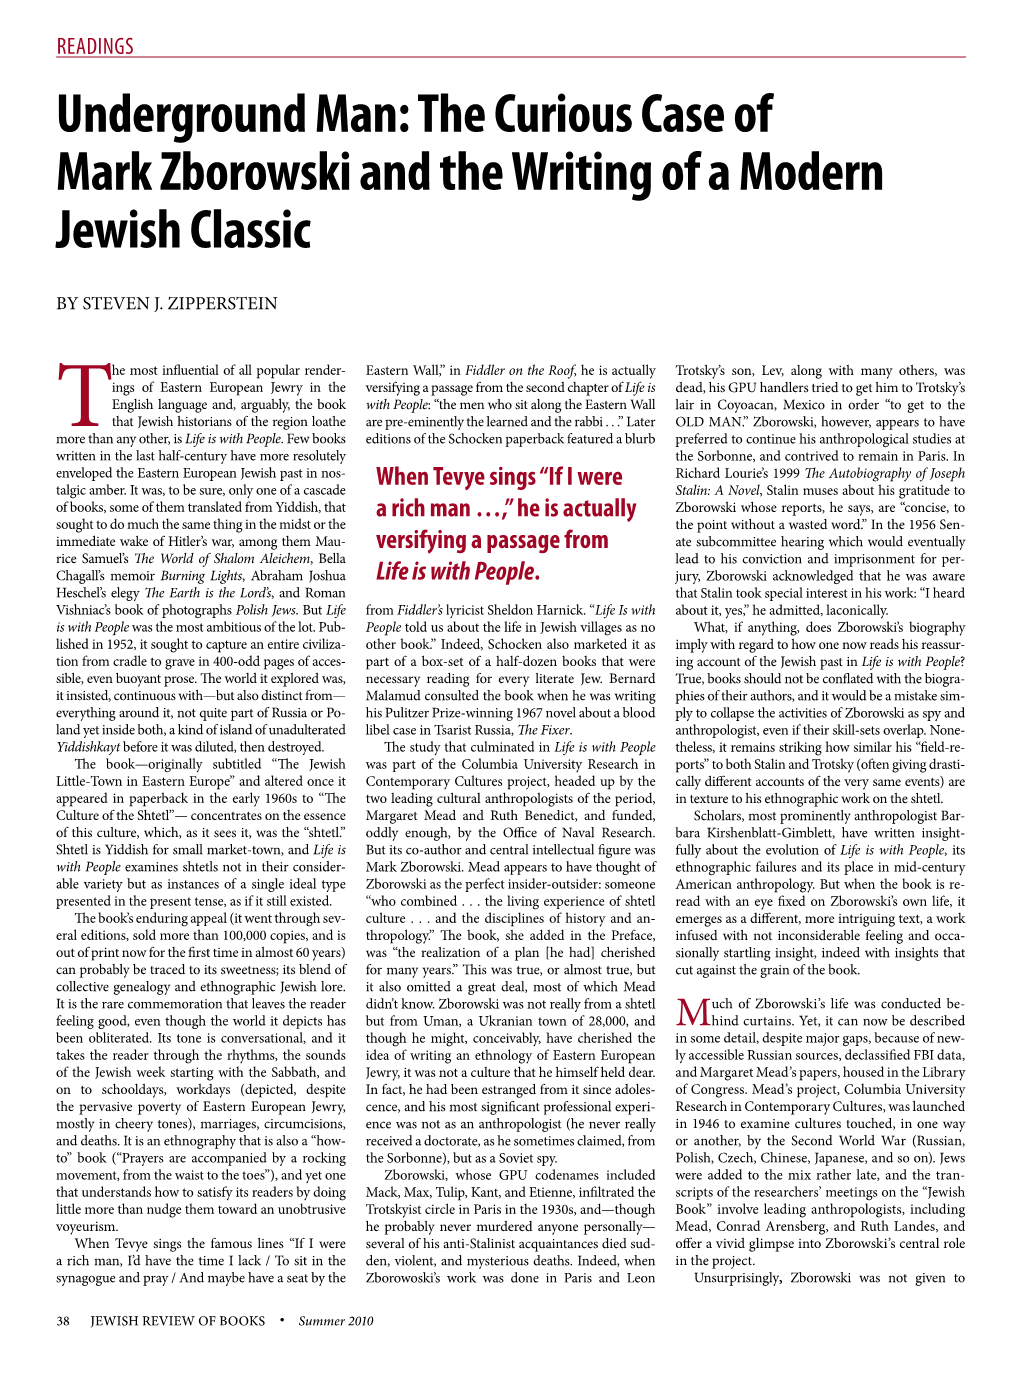 The Curious Case of Mark Zborowski and the Writing of a Modern Jewish Classic